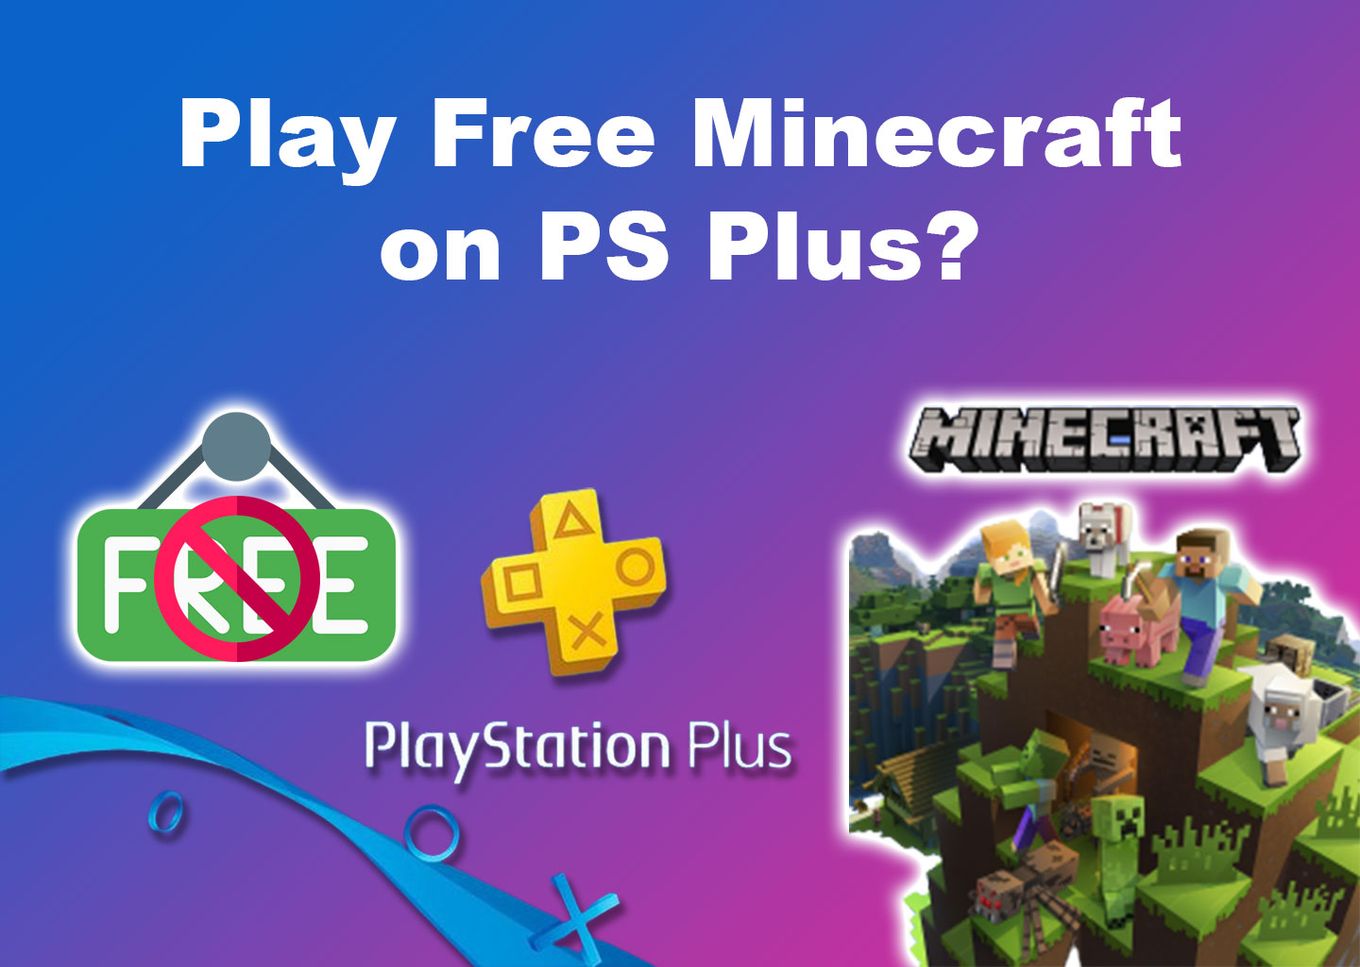 Play Free Minecraft on PS Plus?